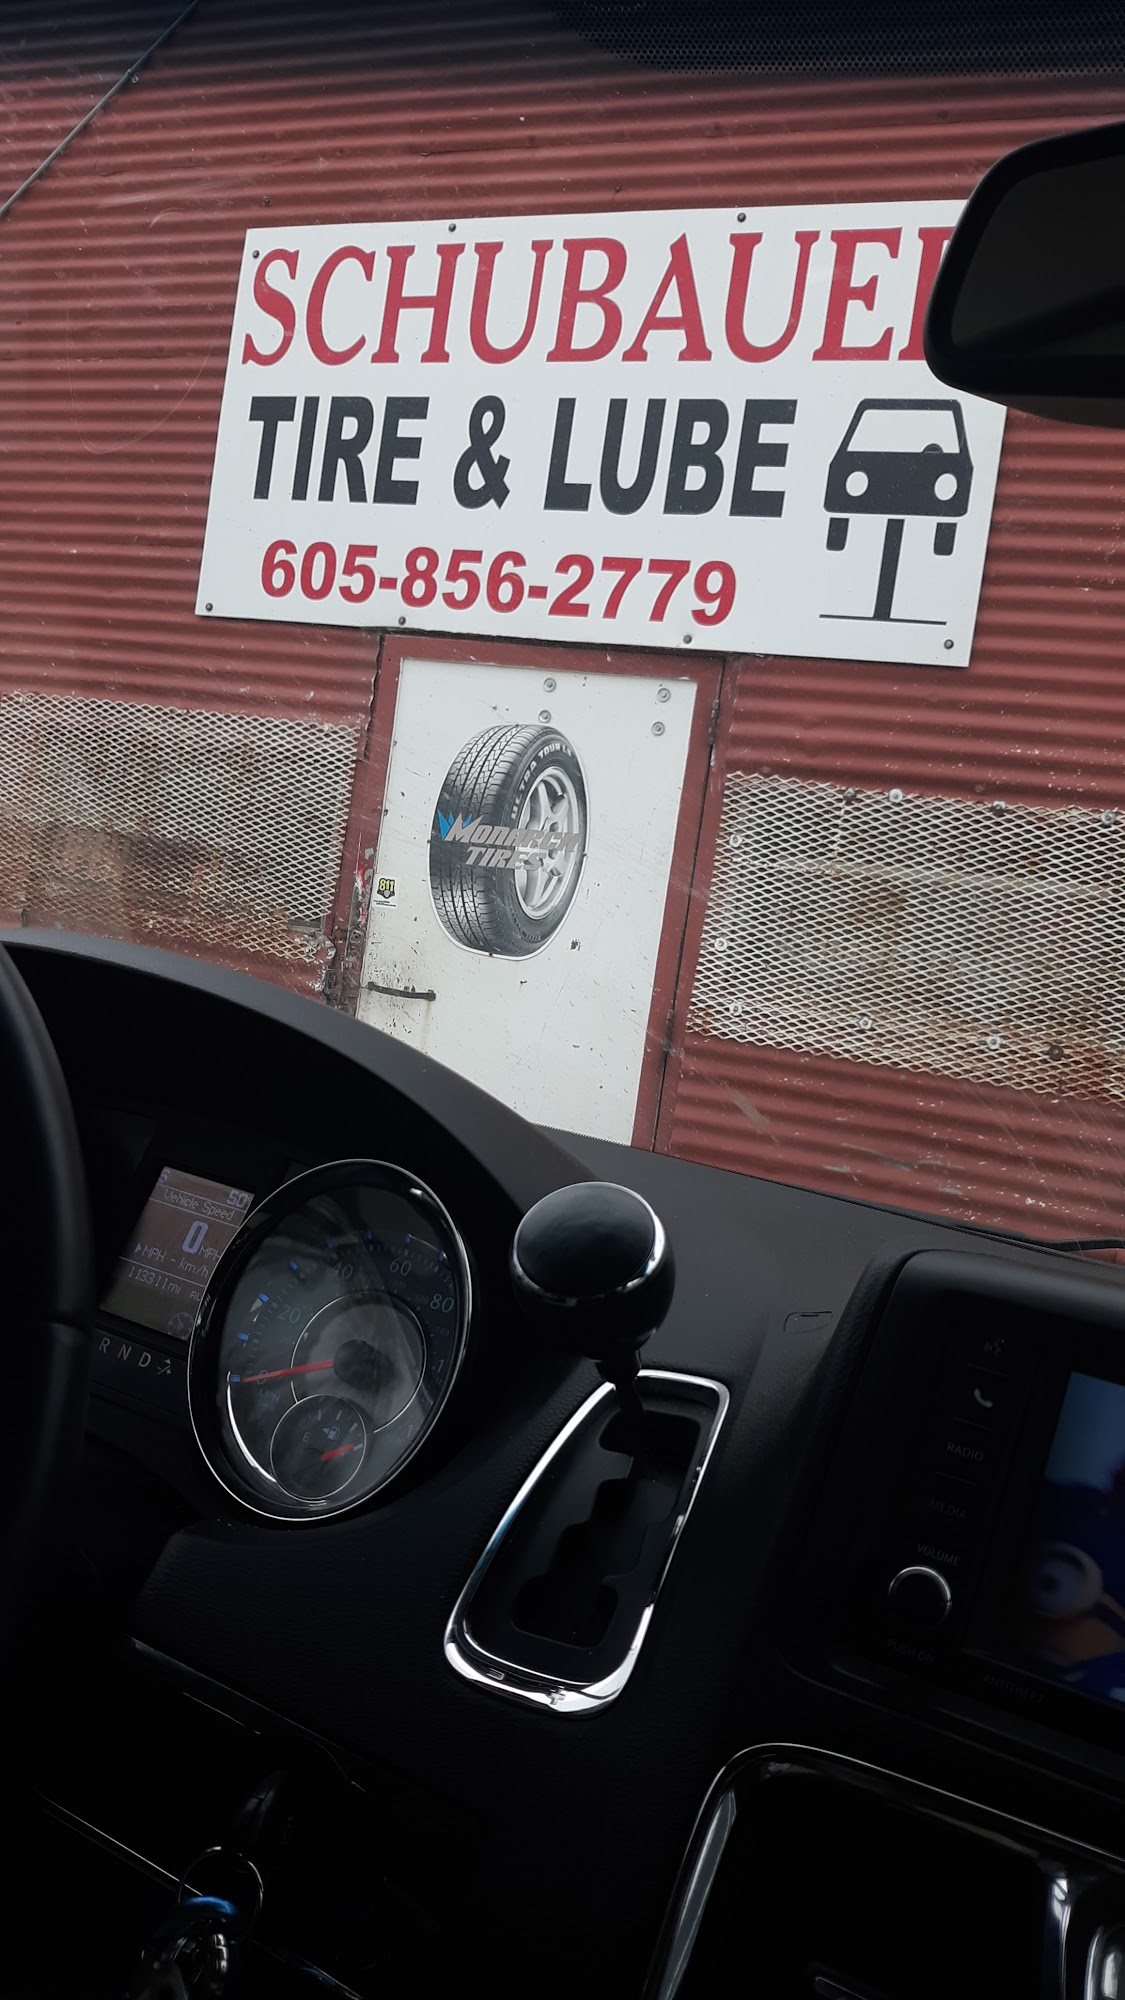 Schubauer Tire and Lube